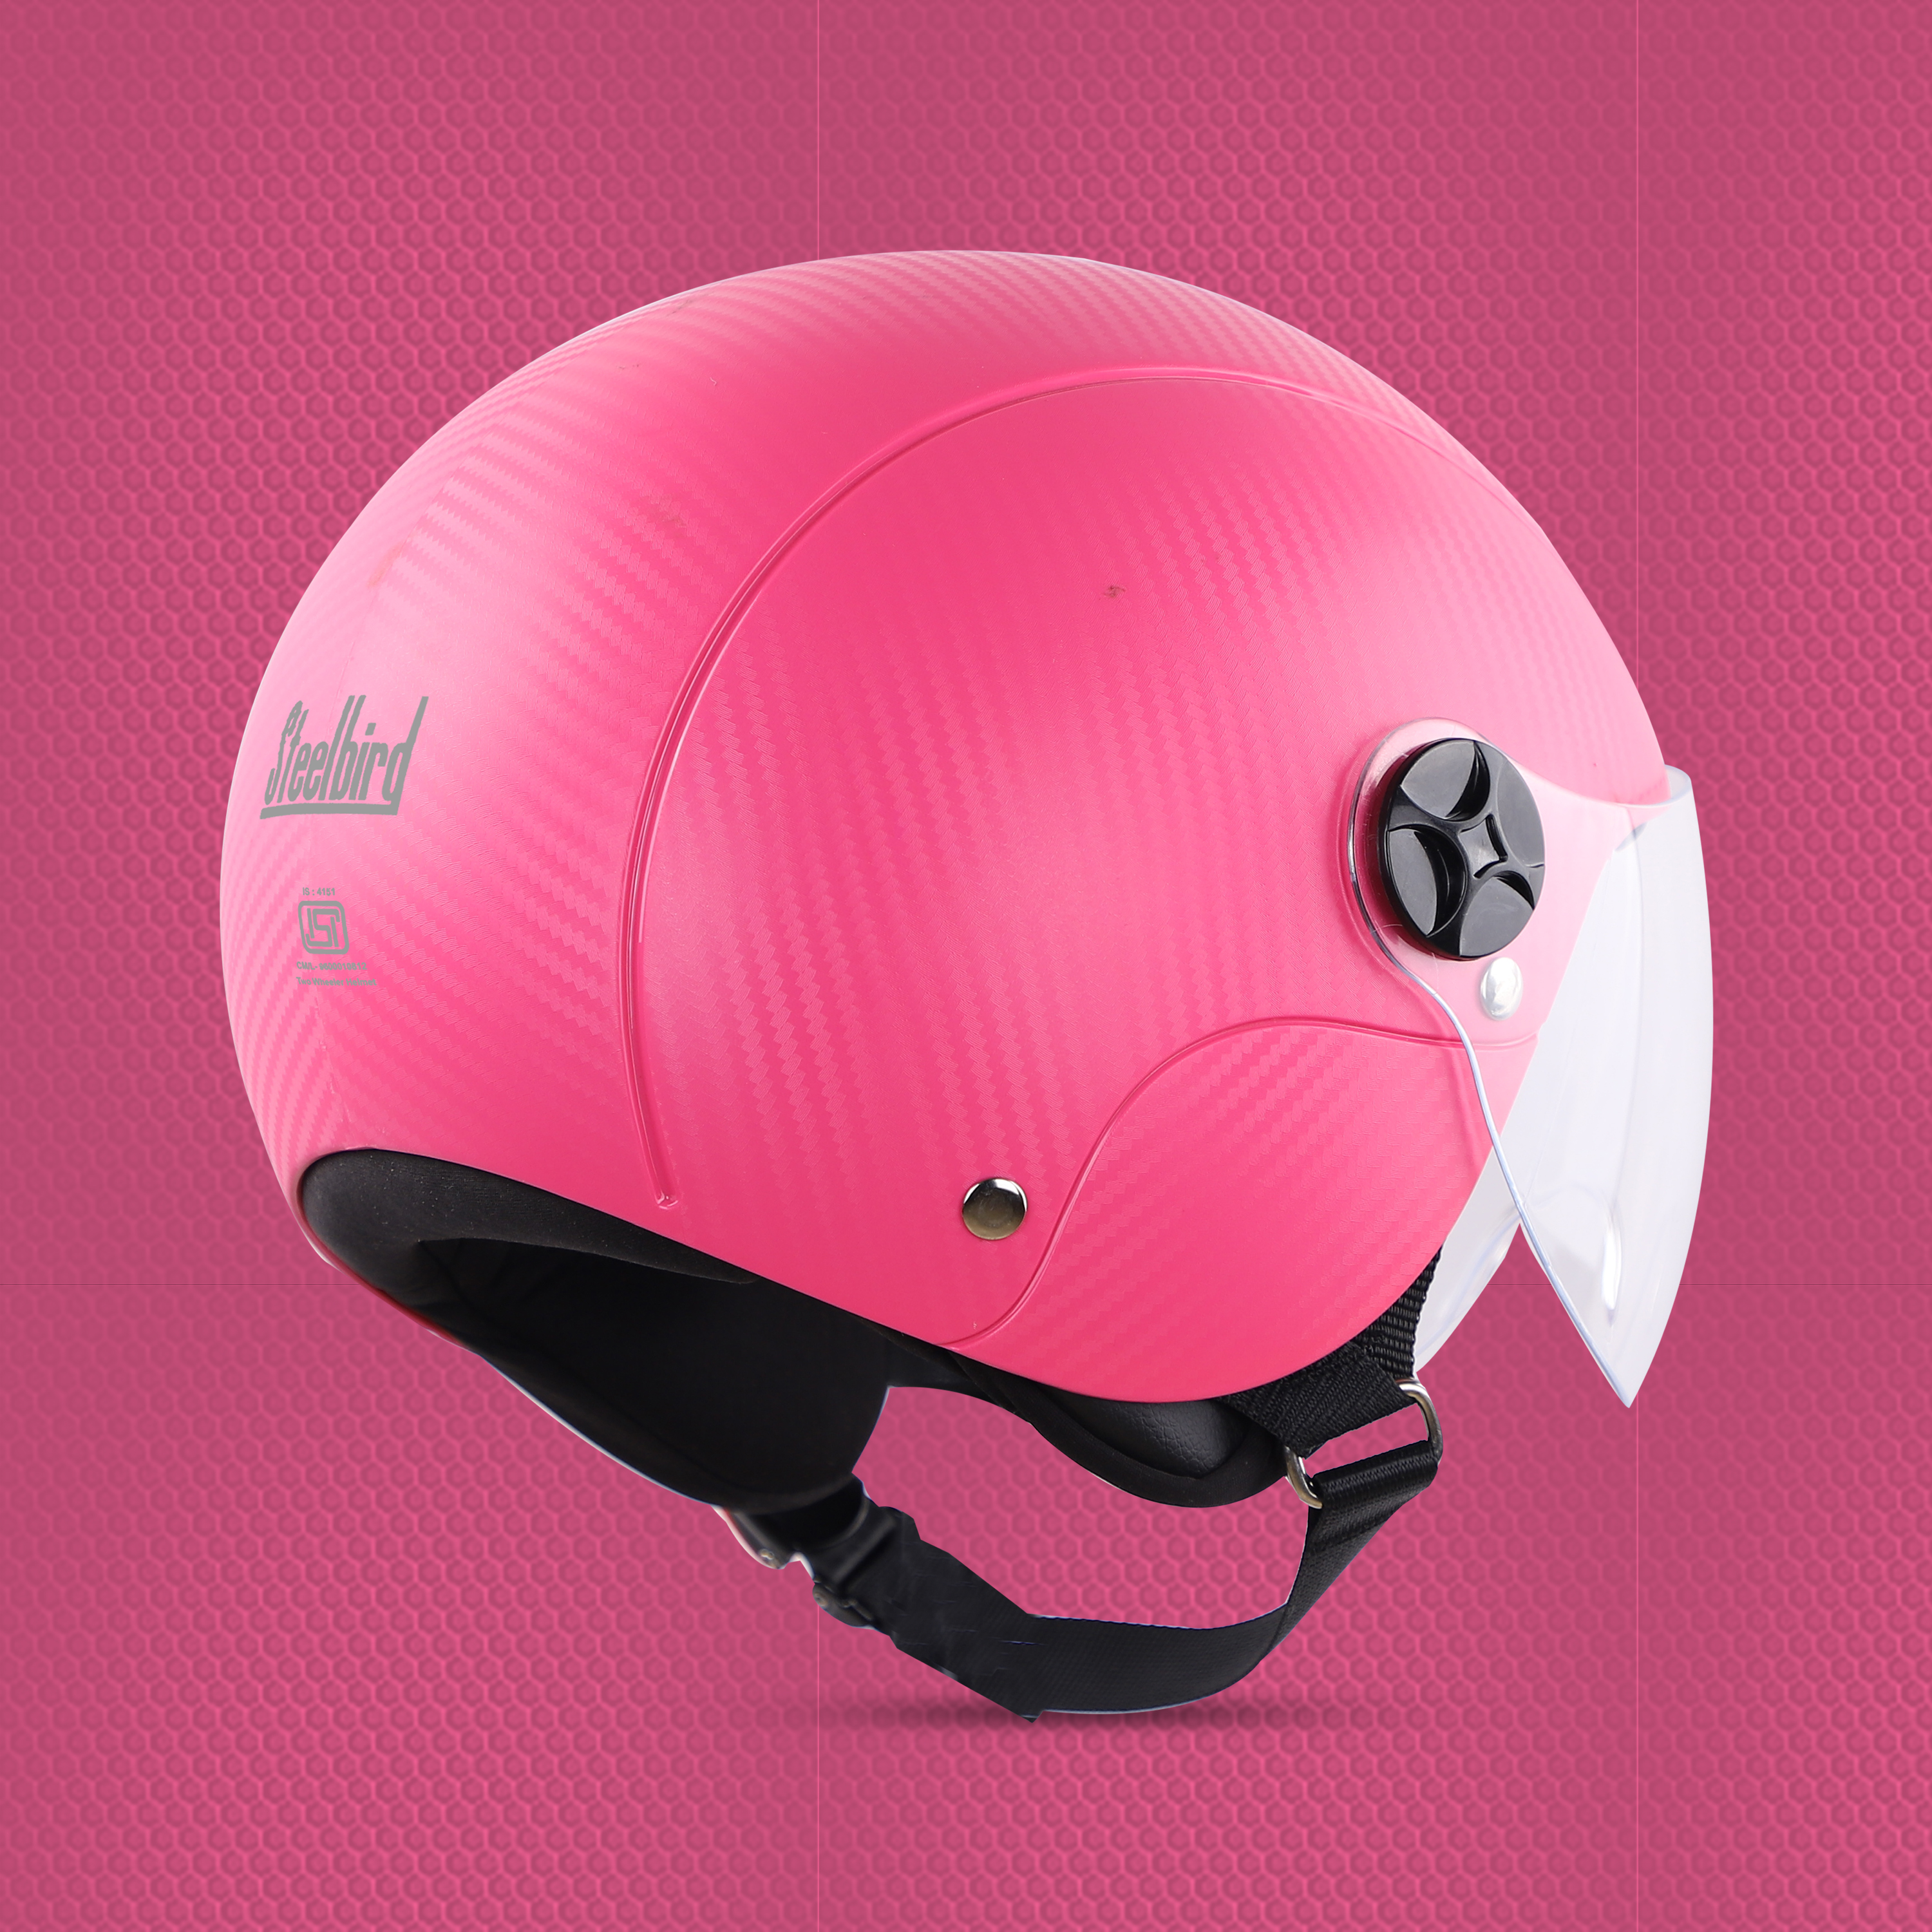 Steelbird SBH-16 Ruby ISI Certified Open Face Helmet (Dashing Pink With Clear Visor)